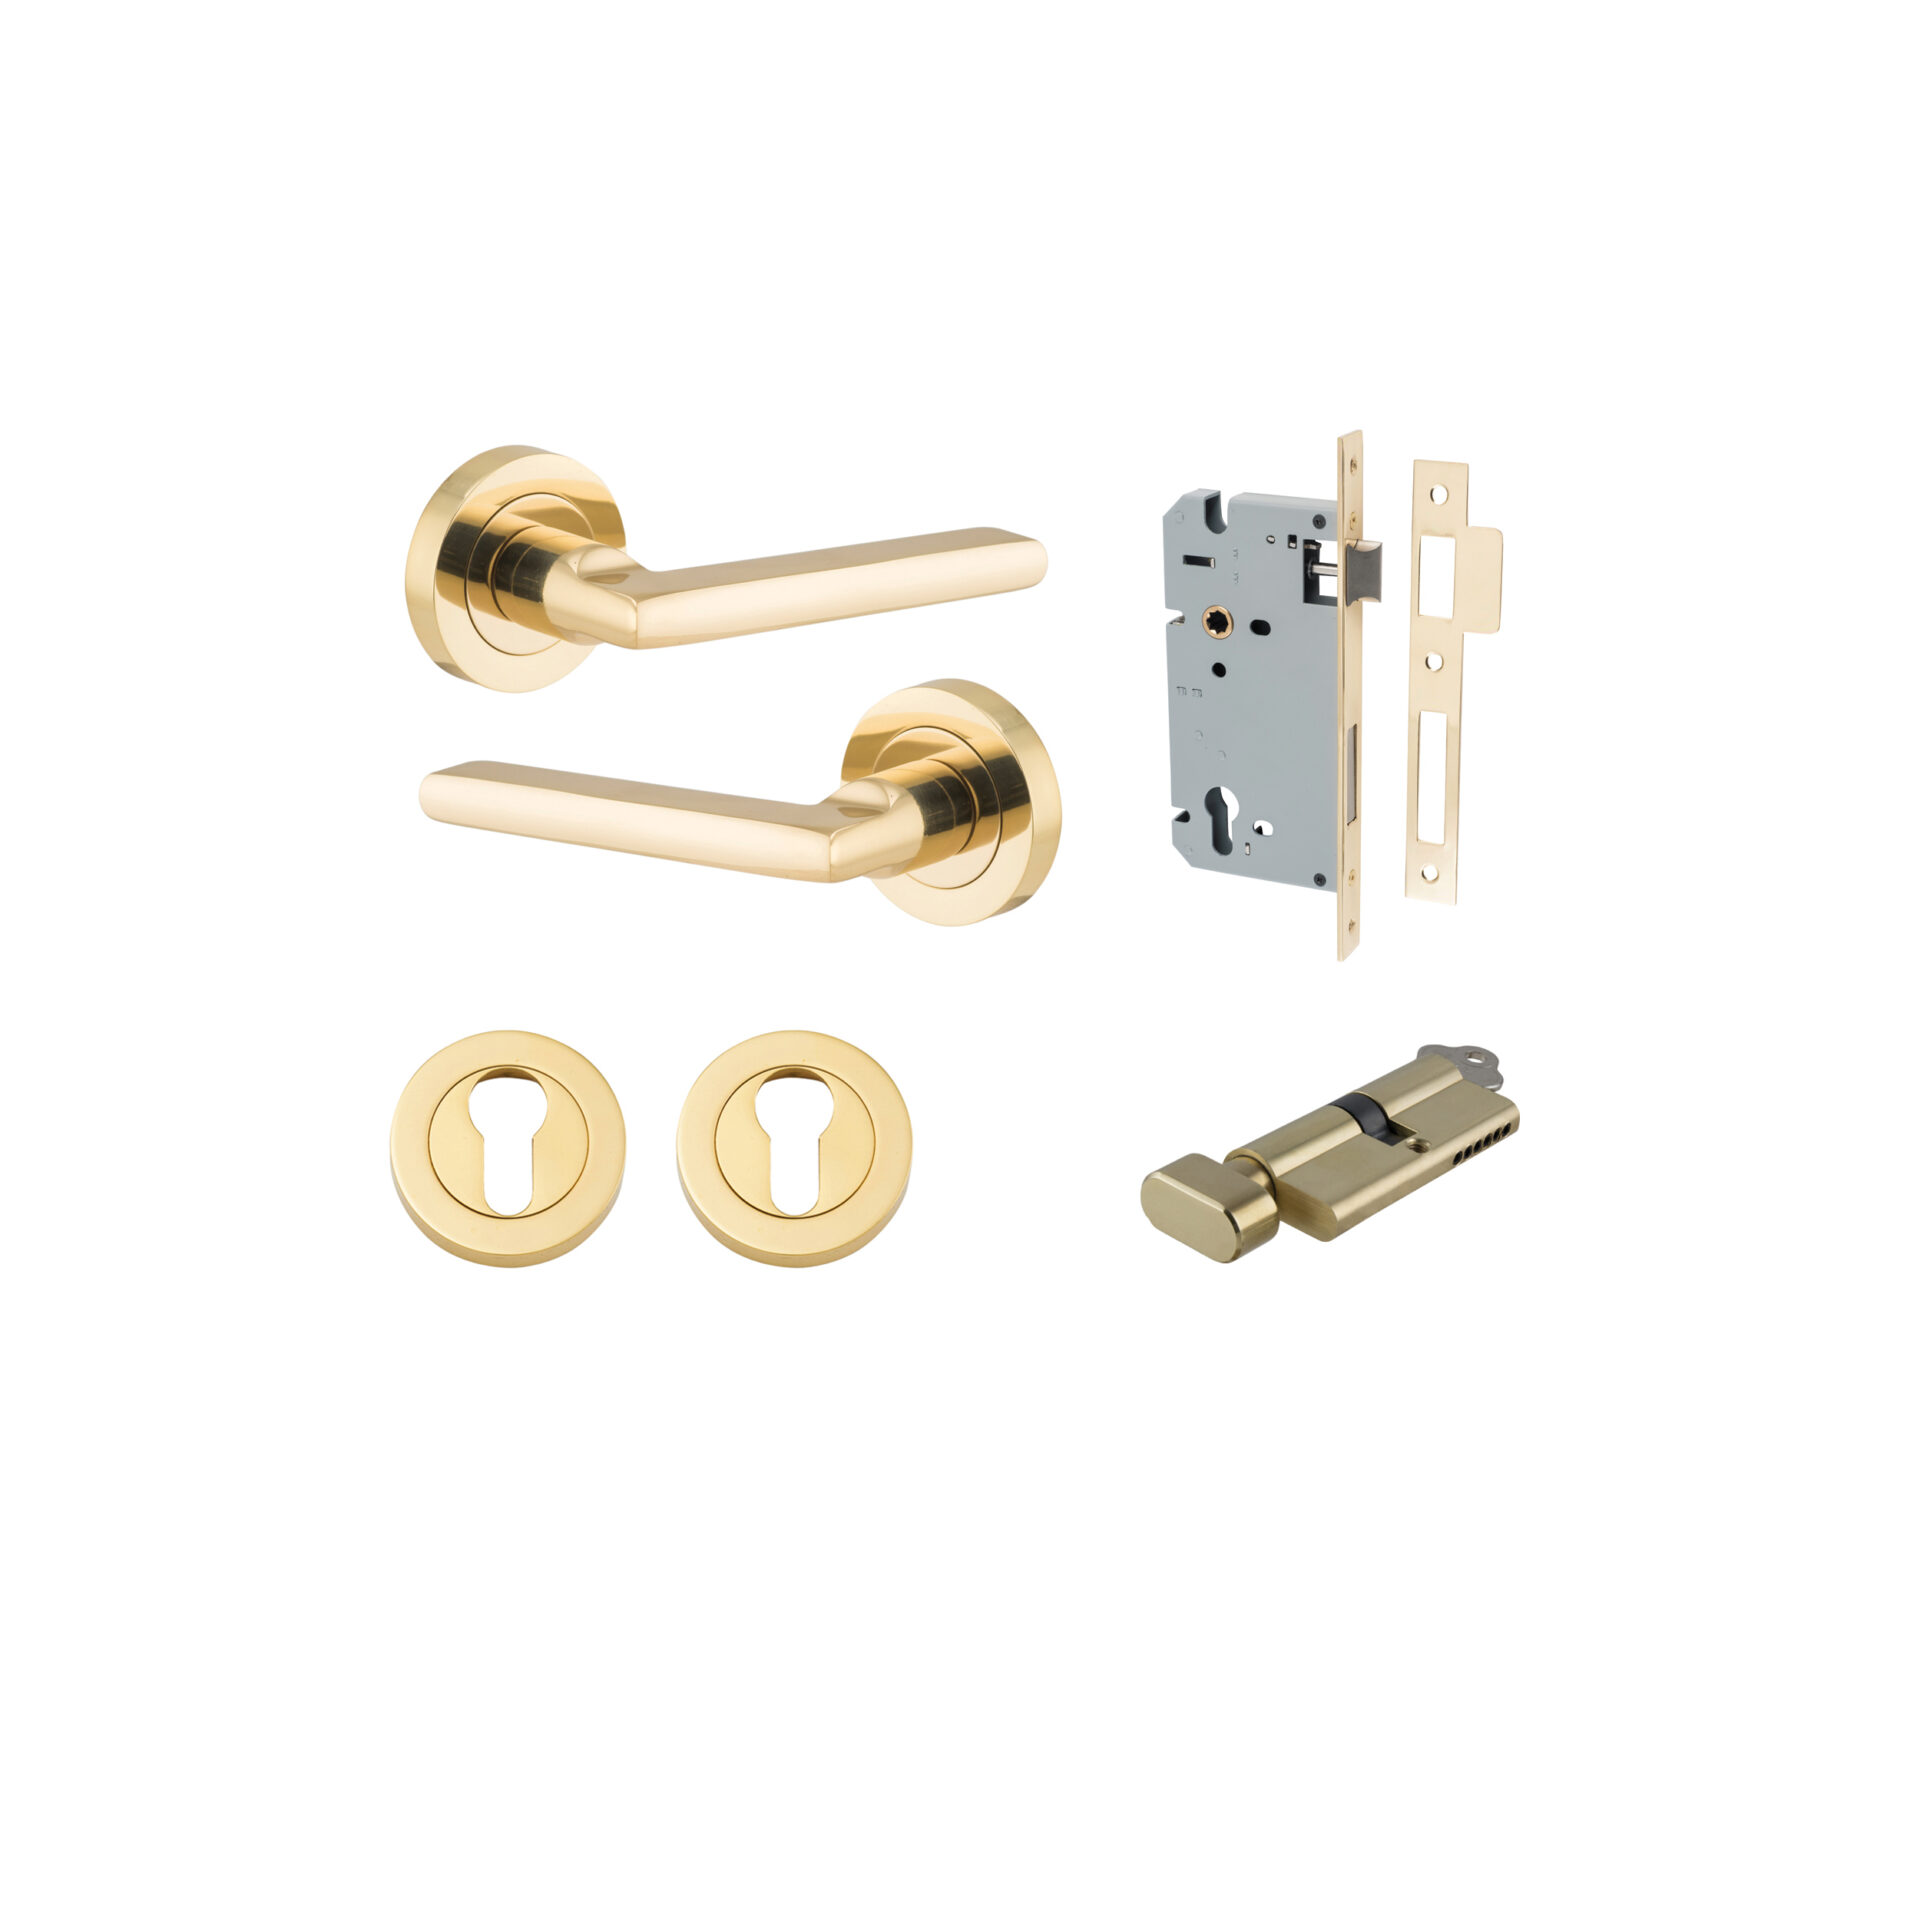 Baltimore Lever - Round Rose Entrance Kit with Separate High Security Lock